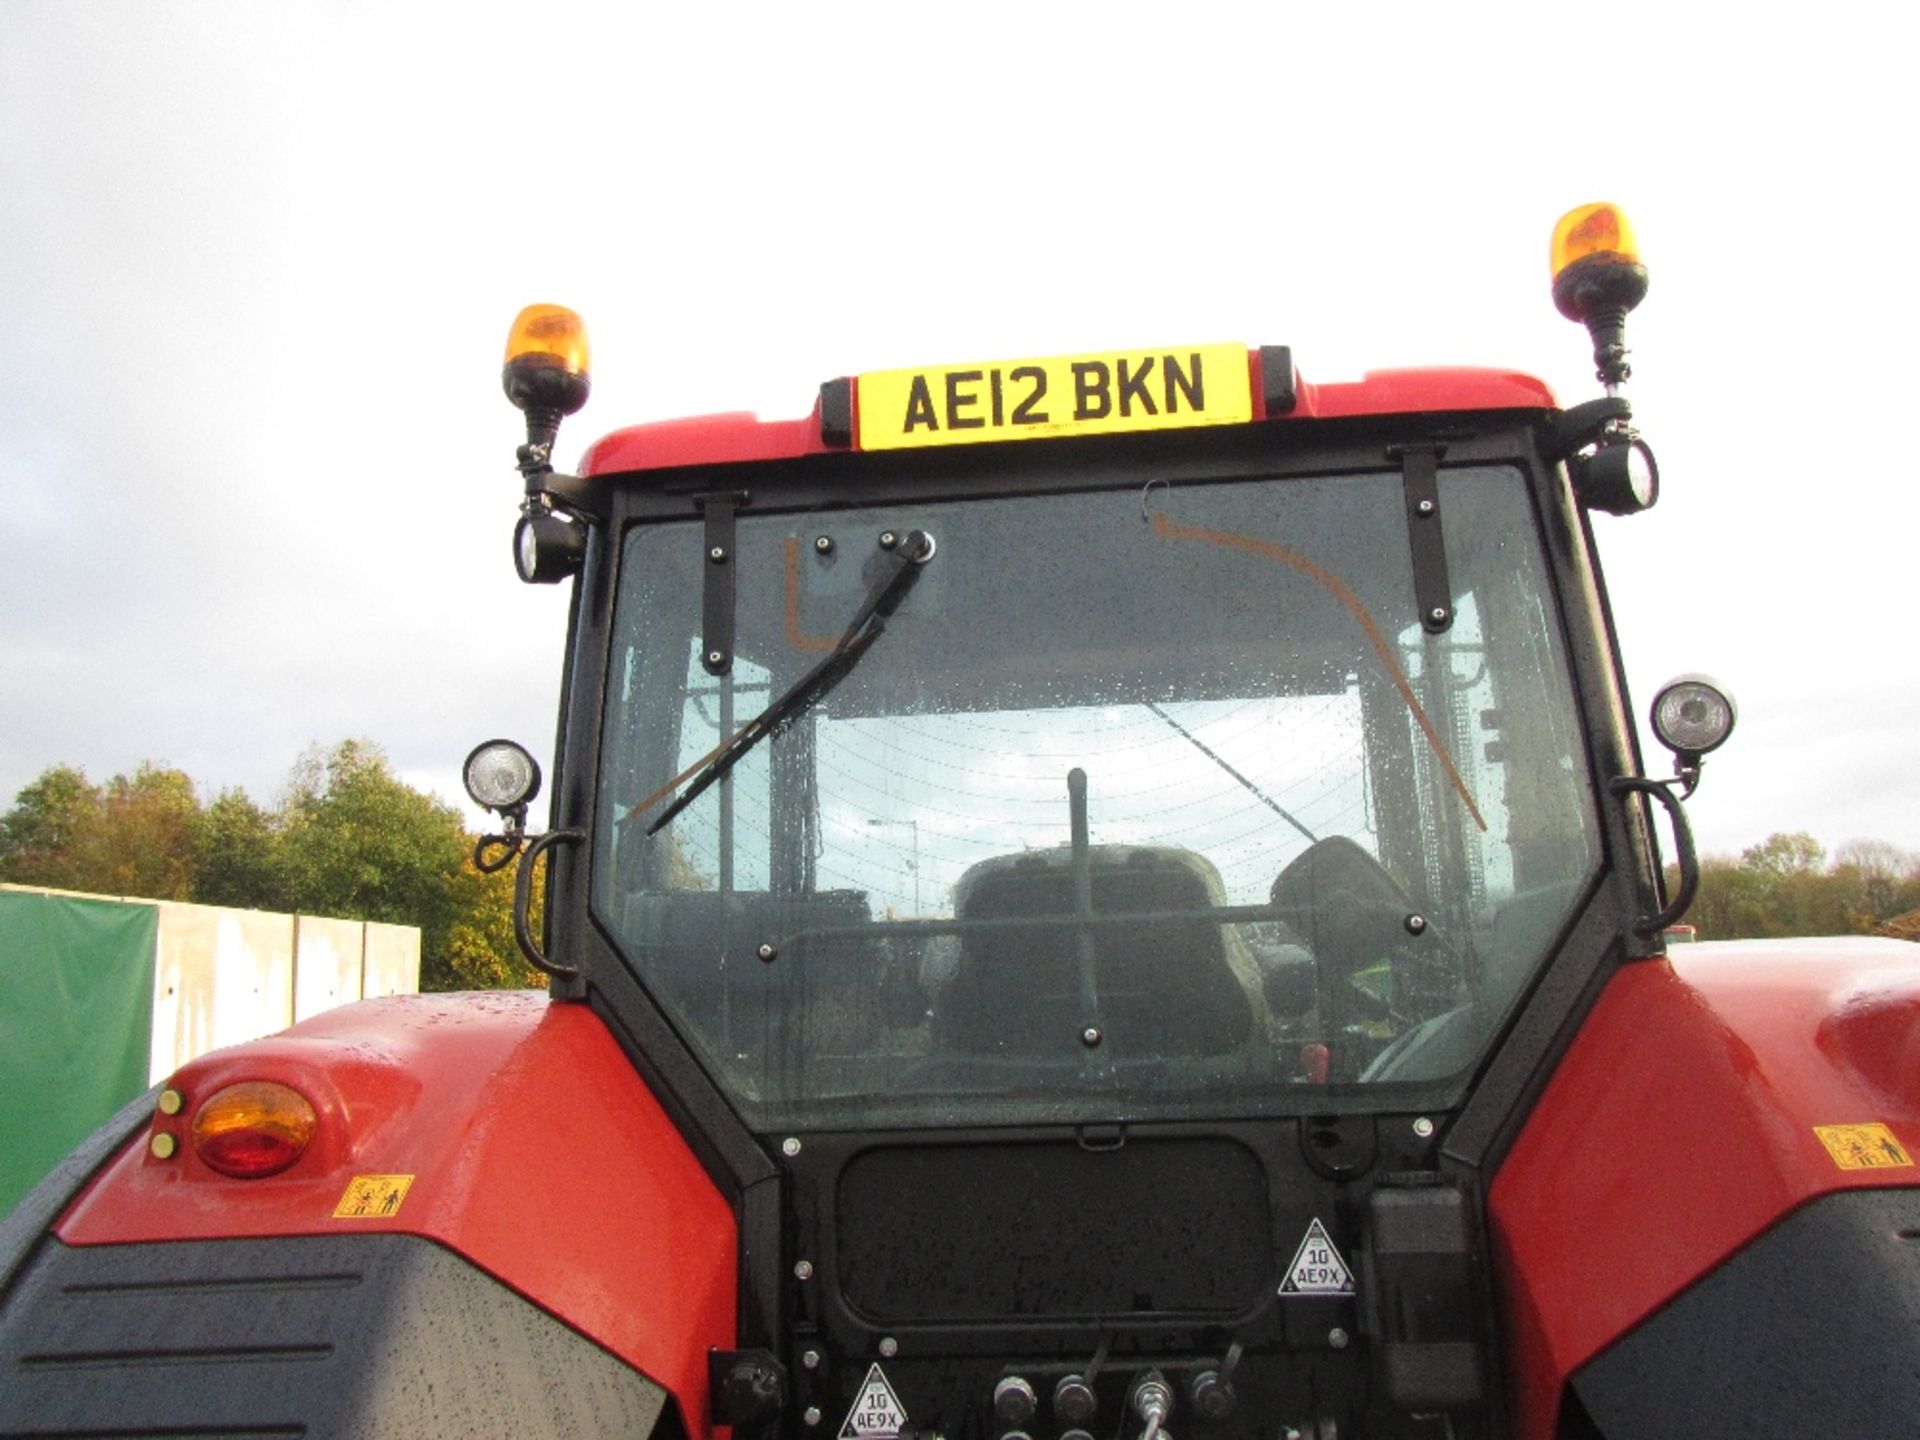 Zetor Forterra 125 4wd Tractor. 260 Trac Lift Loader. Reg Docs will be supplied. Reg. No. AE12 BKN. - Image 9 of 15